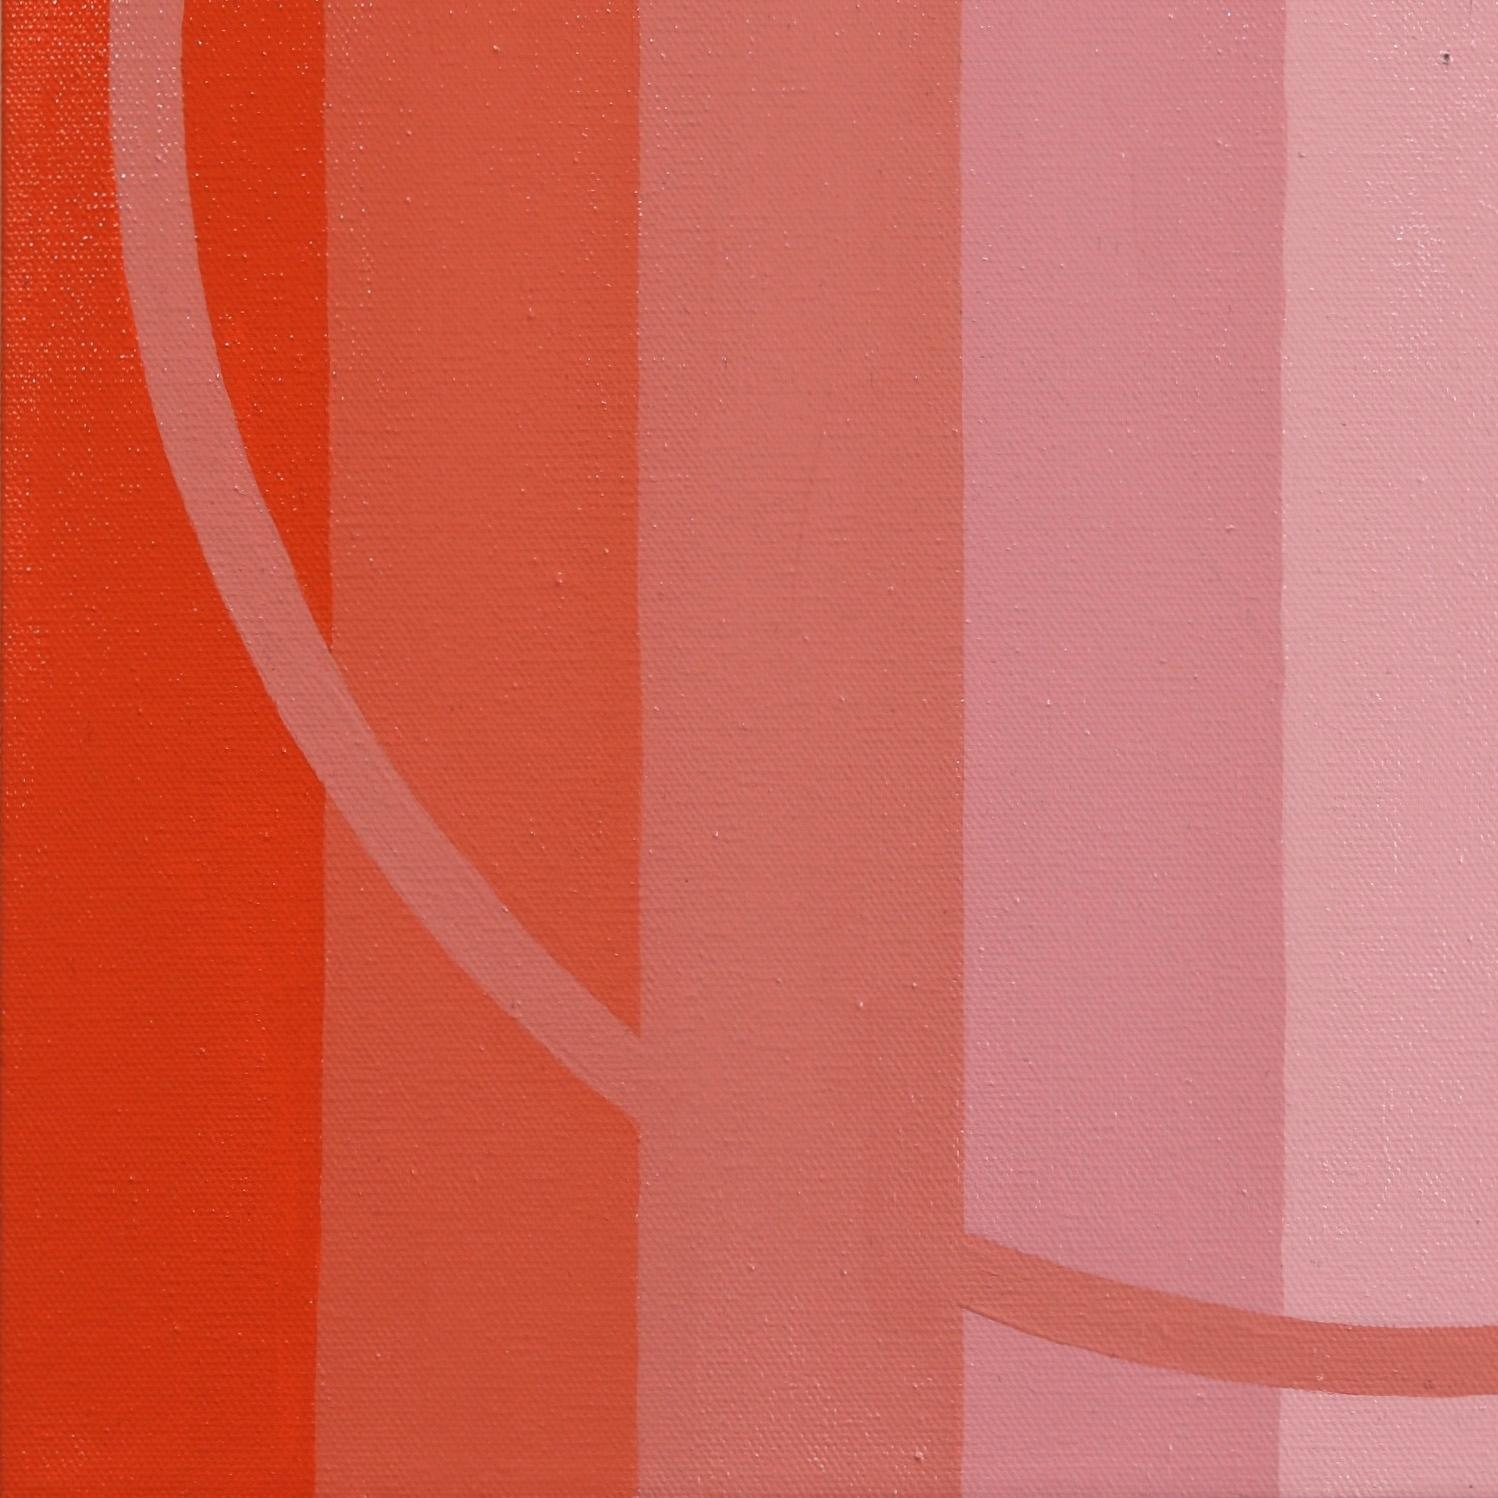 Drawing inspiration from the vibrant California landscape, British artist Paul Westacott creates original abstract artworks that showcase a harmonious blend of minimalist geometry and bold colors. Westacott's artistic focus lies in exploring the